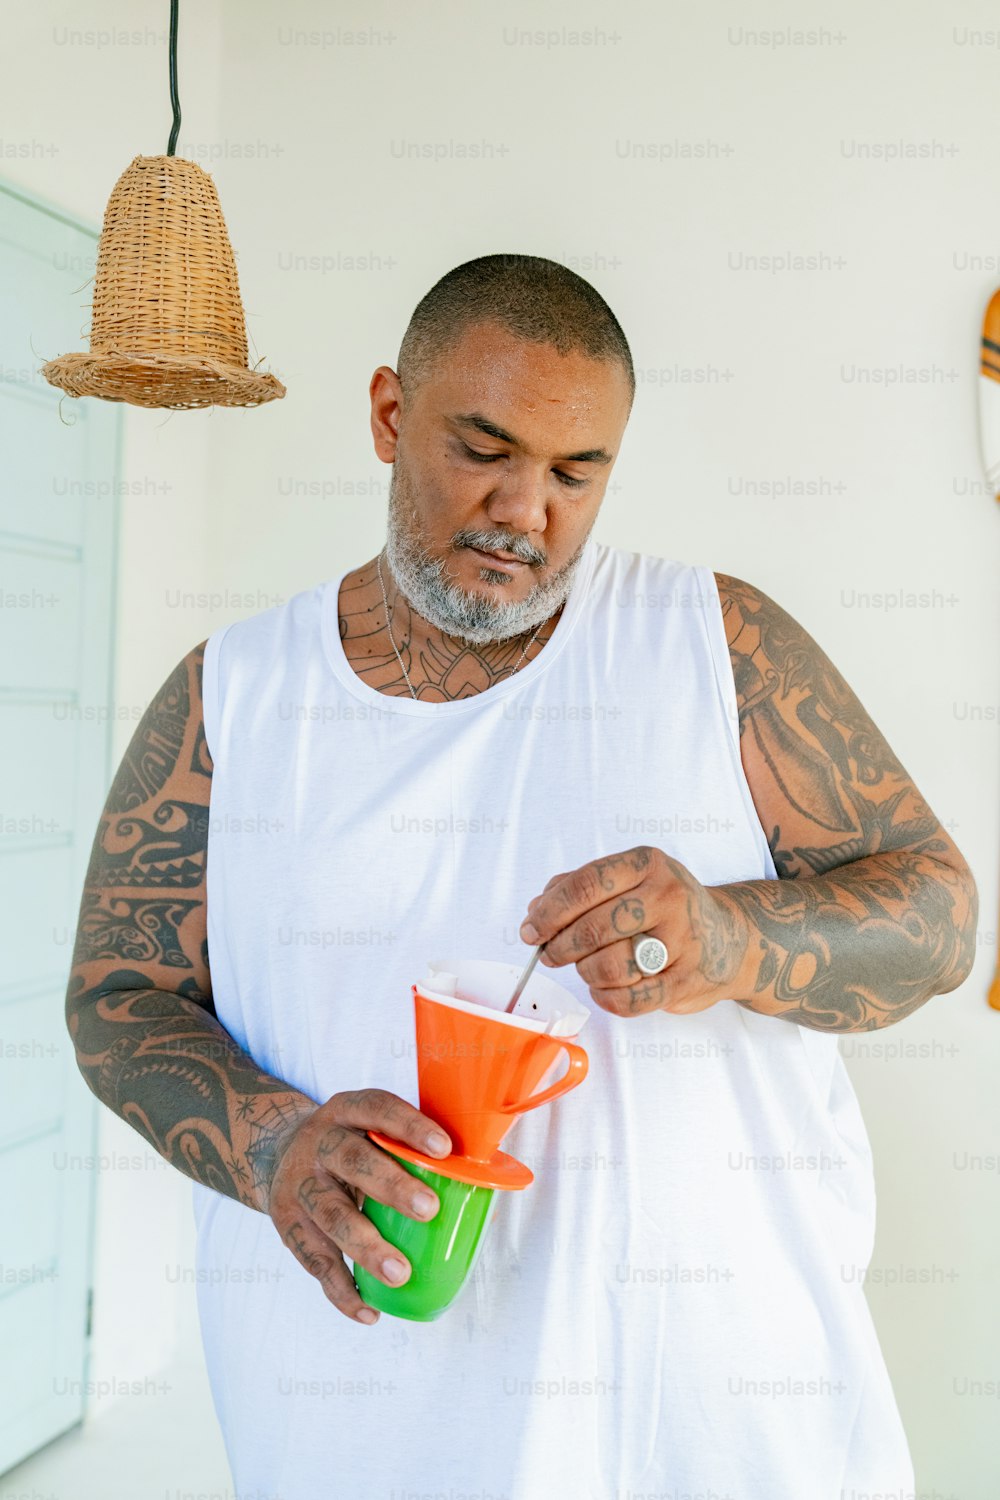 a man with tattoos holding a cup in his hand